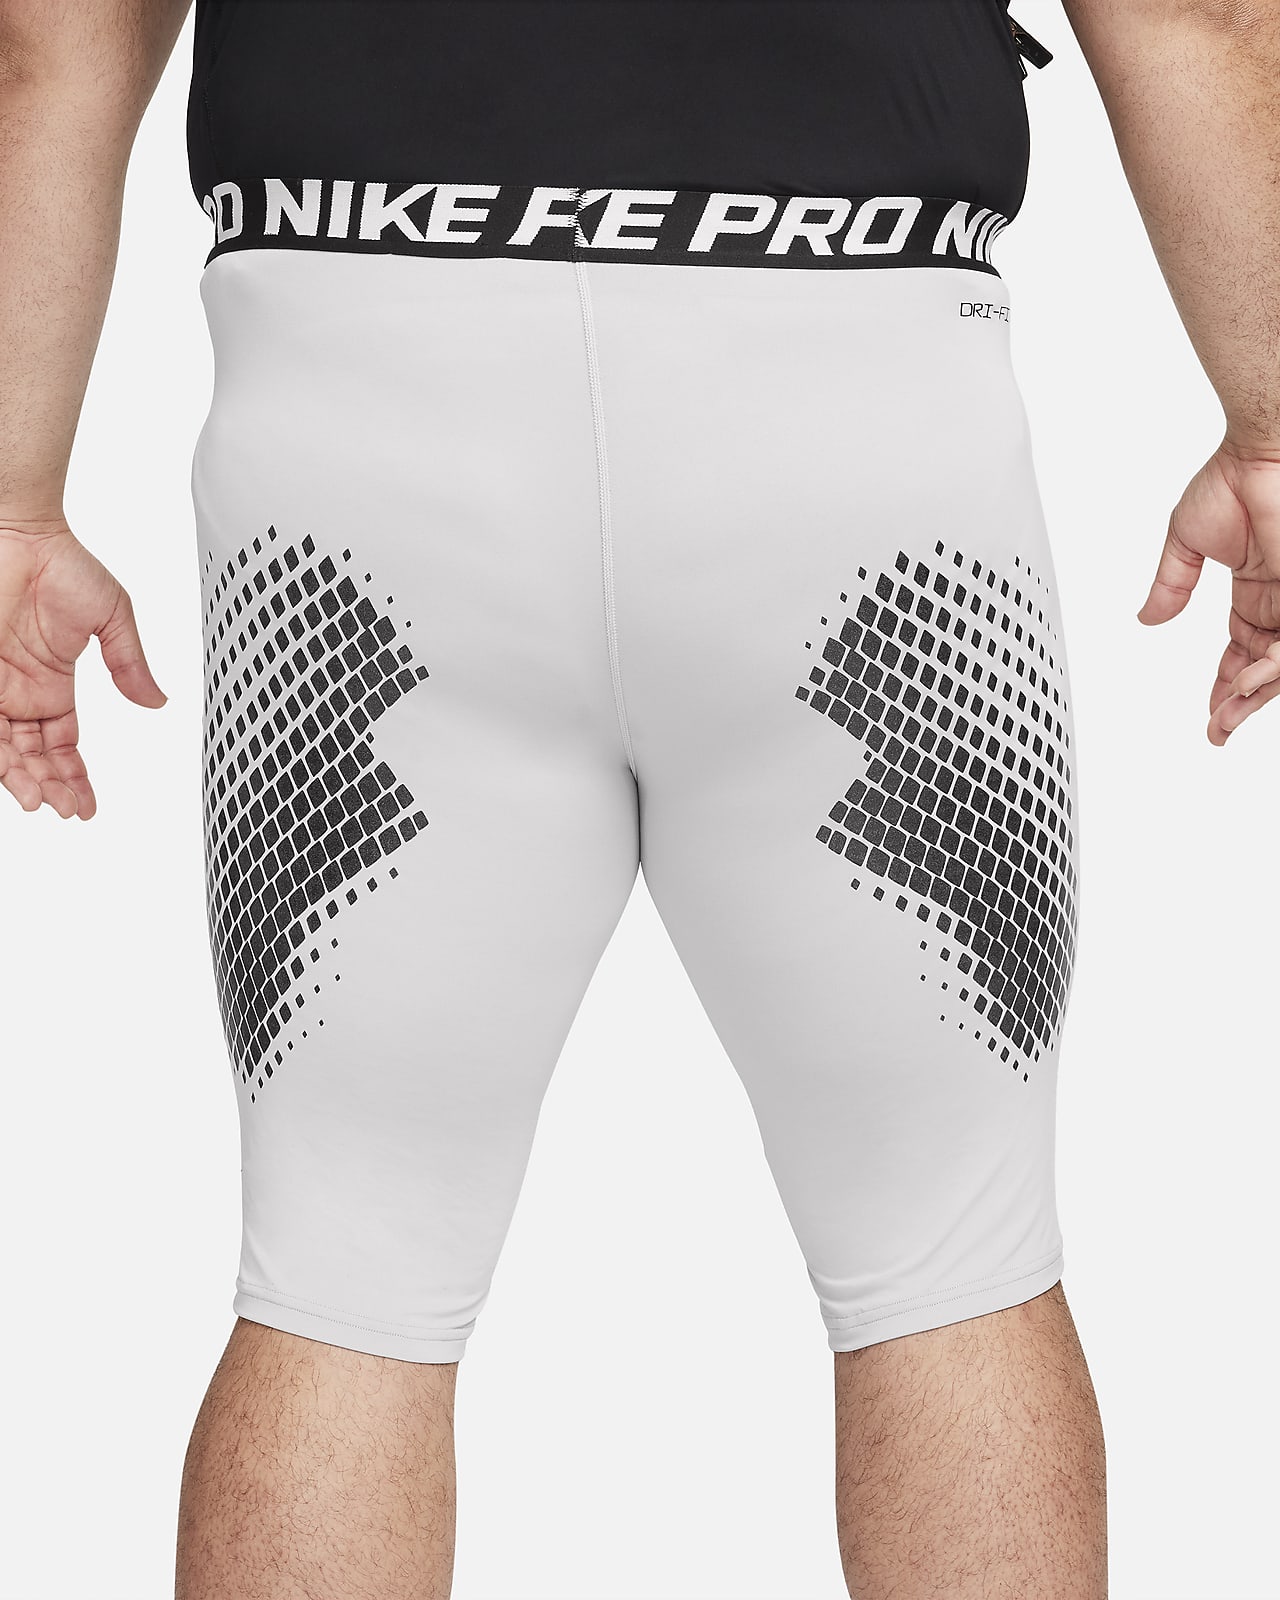 Nike Pro Combat Shorts'. Size Small. Blue and Pink'  Nike pro combat shorts,  Combat shorts, Nike pro combat